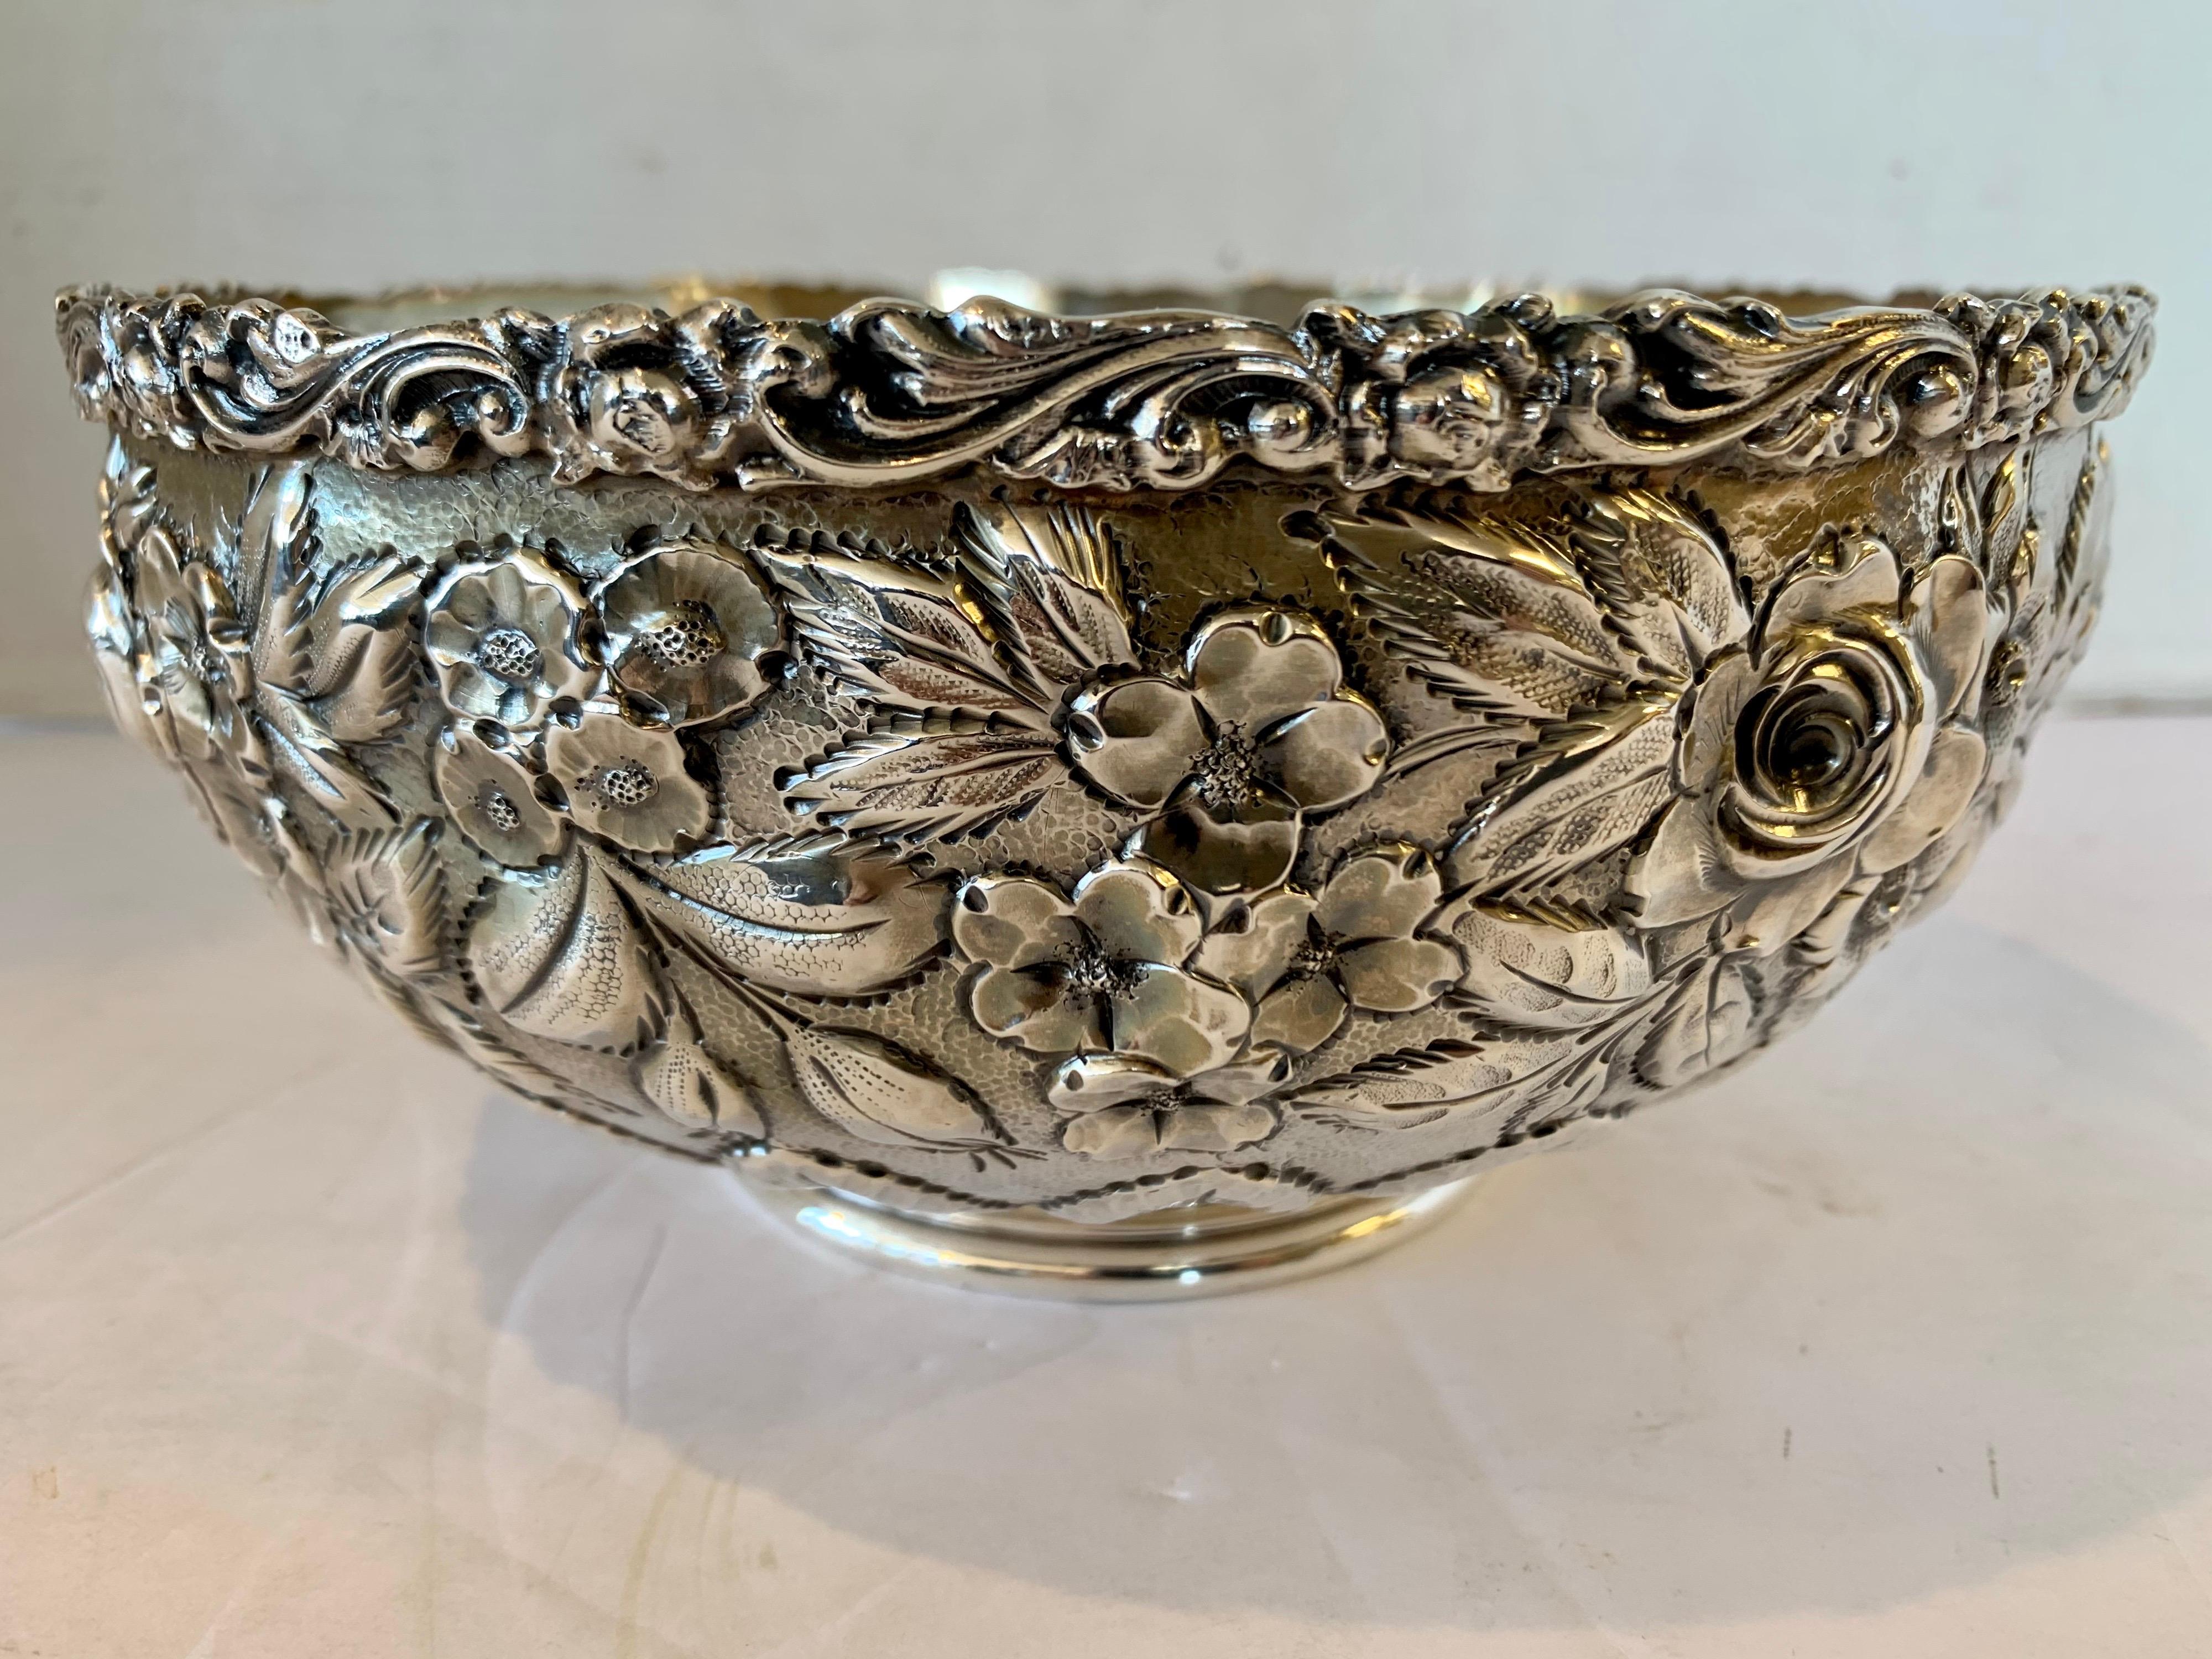 Stunning antique repousse serving bowl with intricate detail throughout. One of the most magnificent piece of repousse available; the detail is like a work of art. Now, more than ever, home is where the heart is. Troy ounce weight is 16.75.